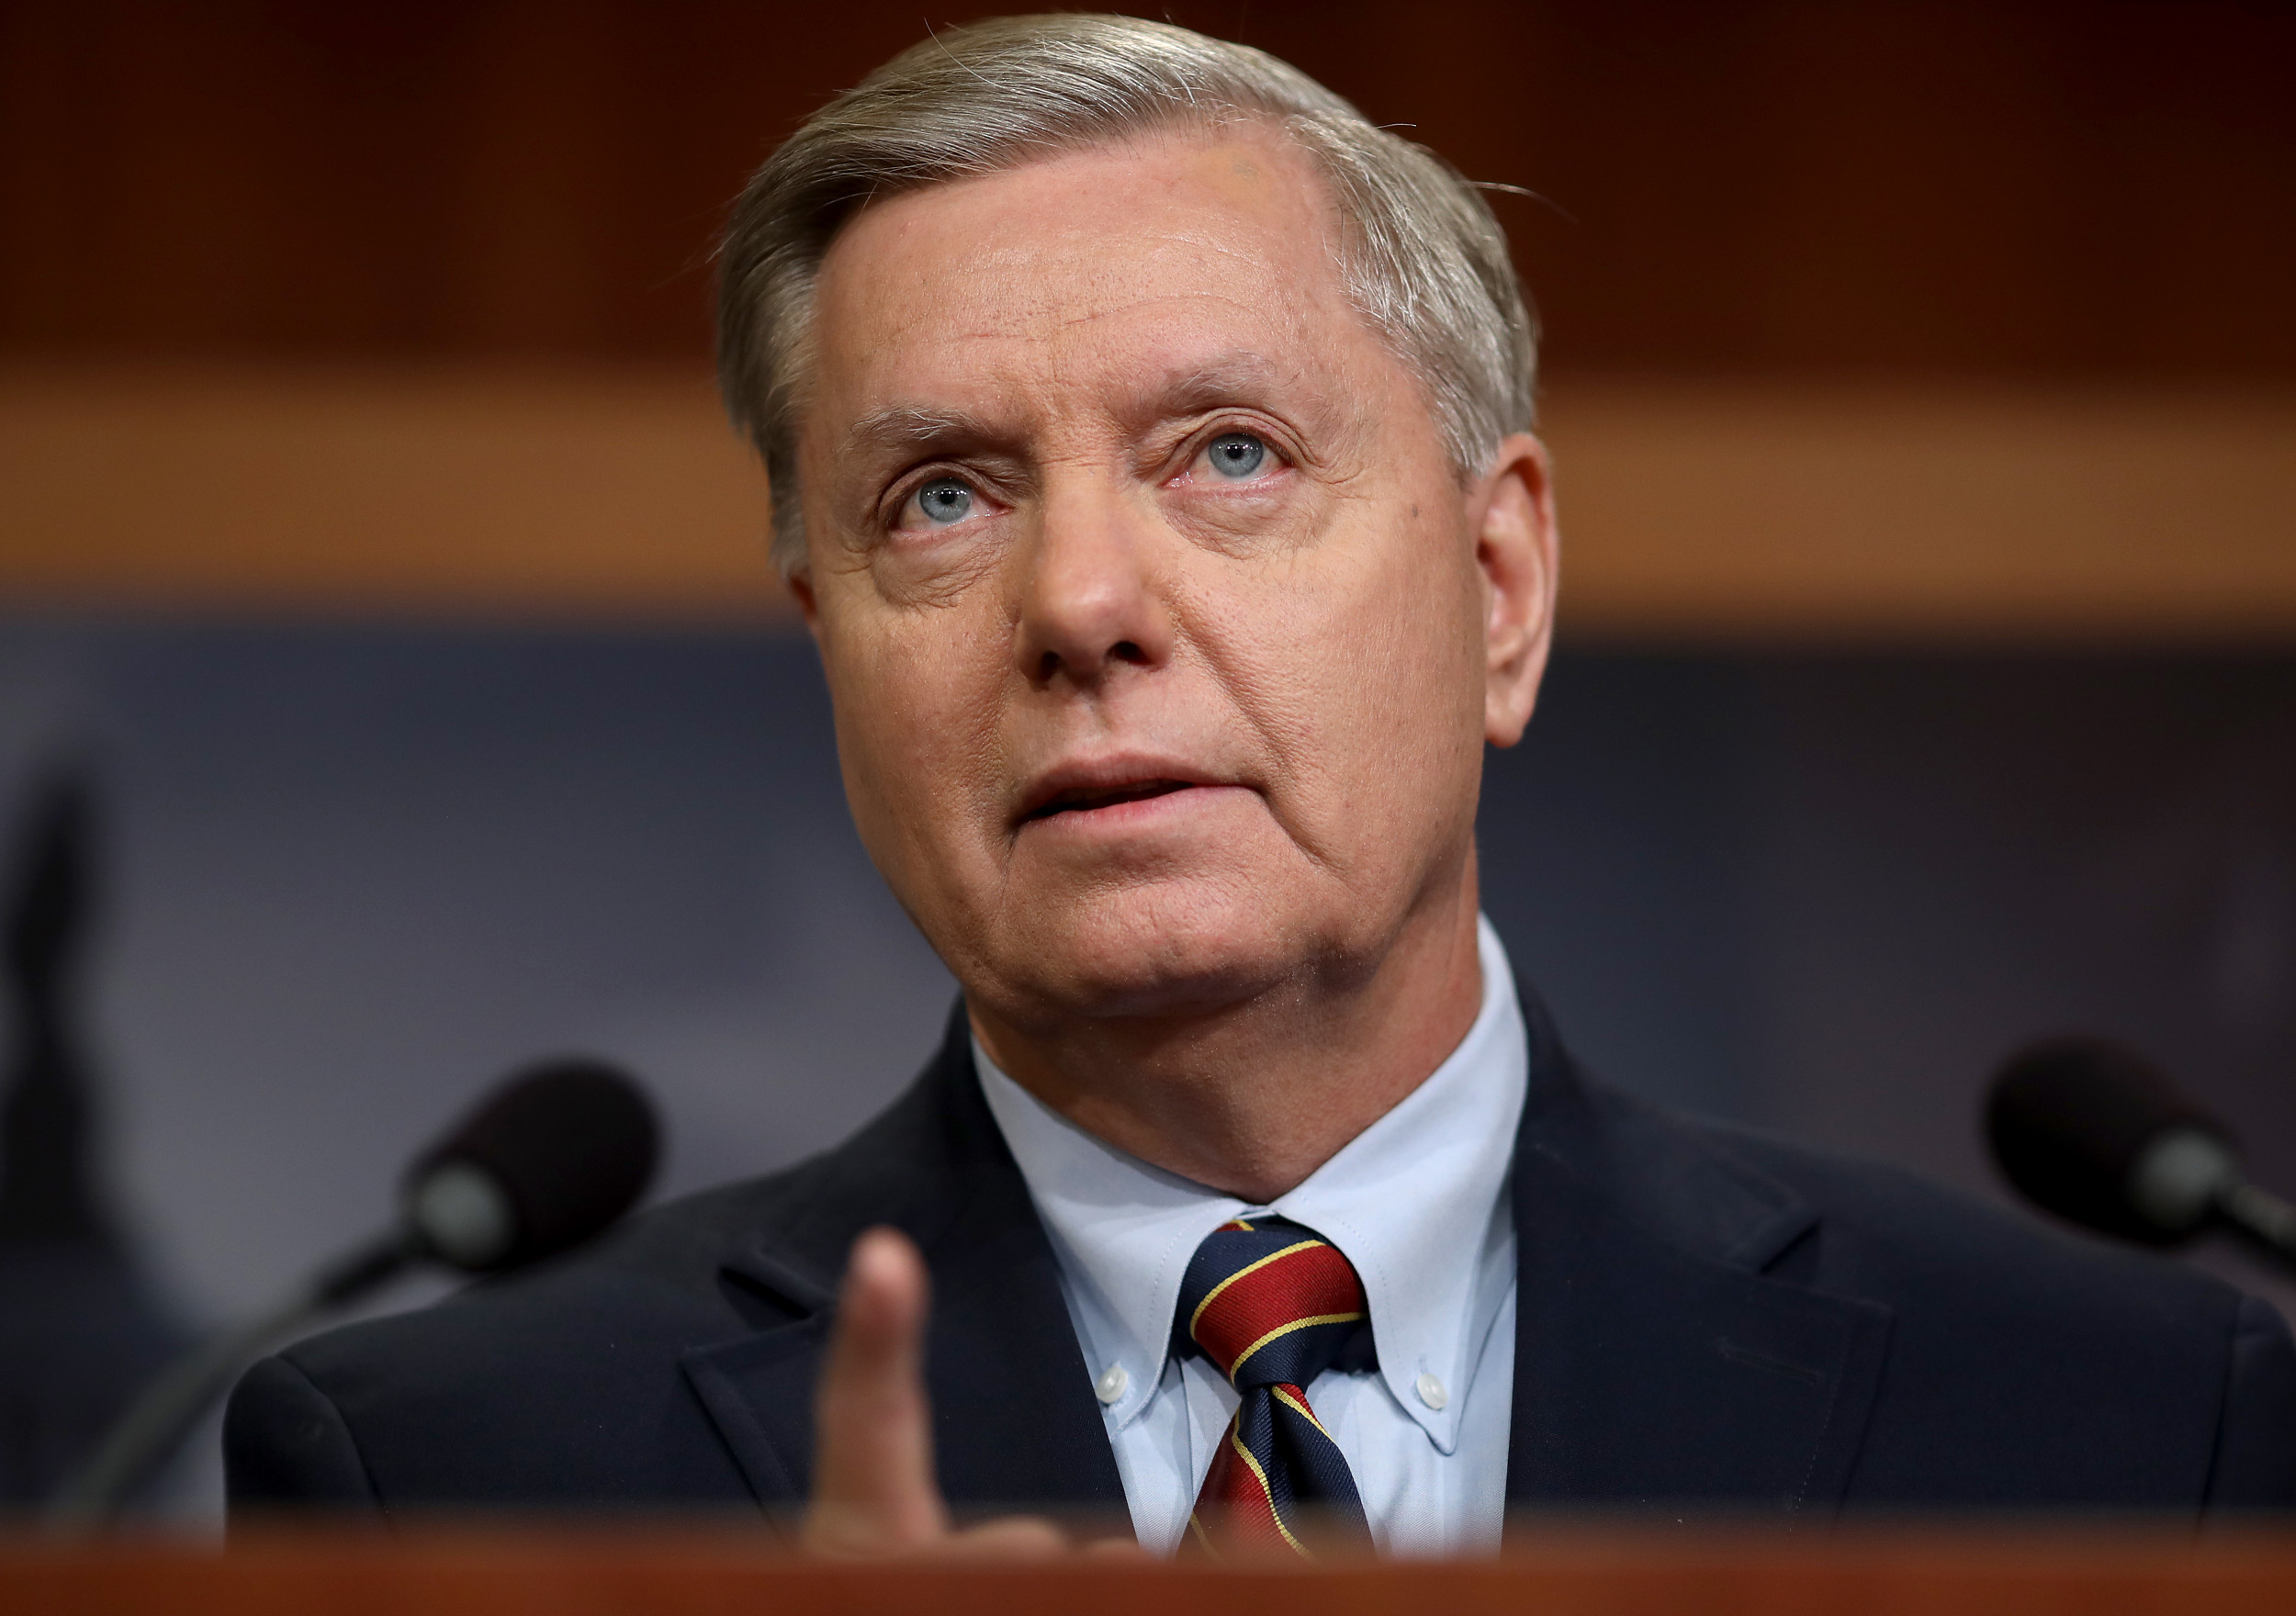 Lindsey Graham is attacked by Trump supporters online after condemning the Republican Party’s election challenge